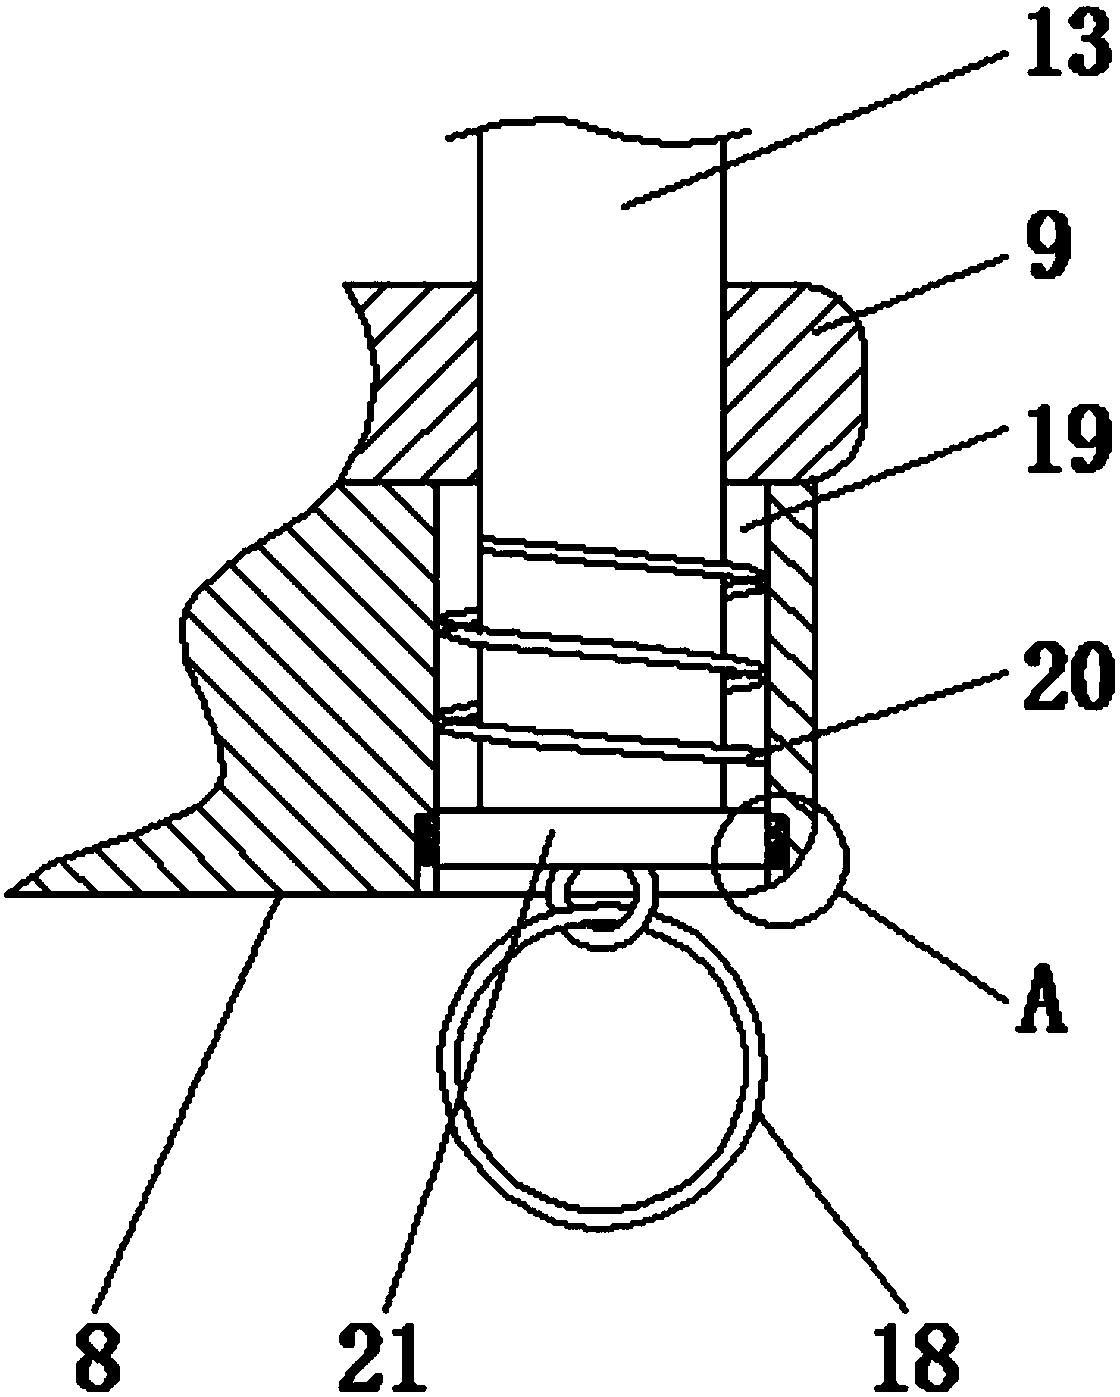 Filter membrane clamping device with self-locking and damping functions